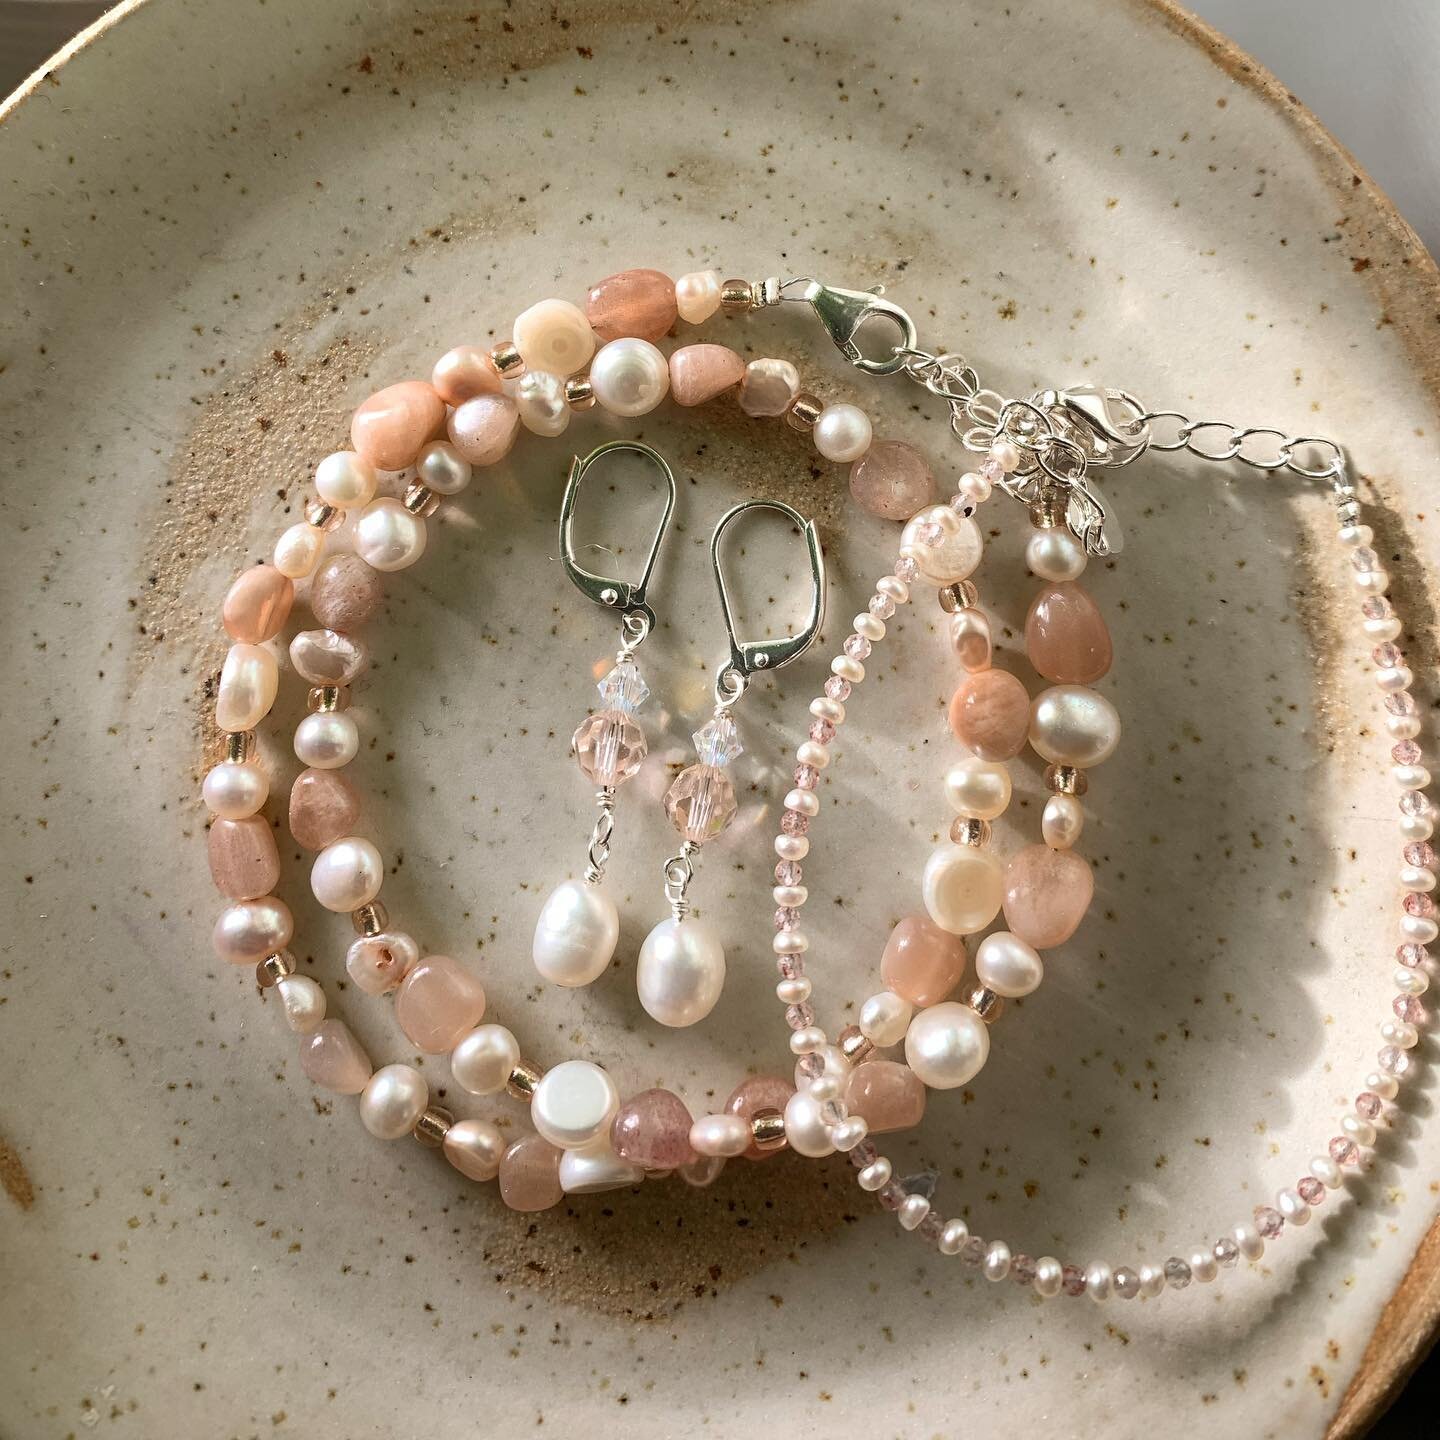 new new new, all launching tonight @ 8pm 🥳🥰

the perfect wee set, made with freshwater pearls, swarovski crystal, strawberry quartz, pink moonstone &amp; glass!

launching @ 8pm in our mini launch tonight 🌟